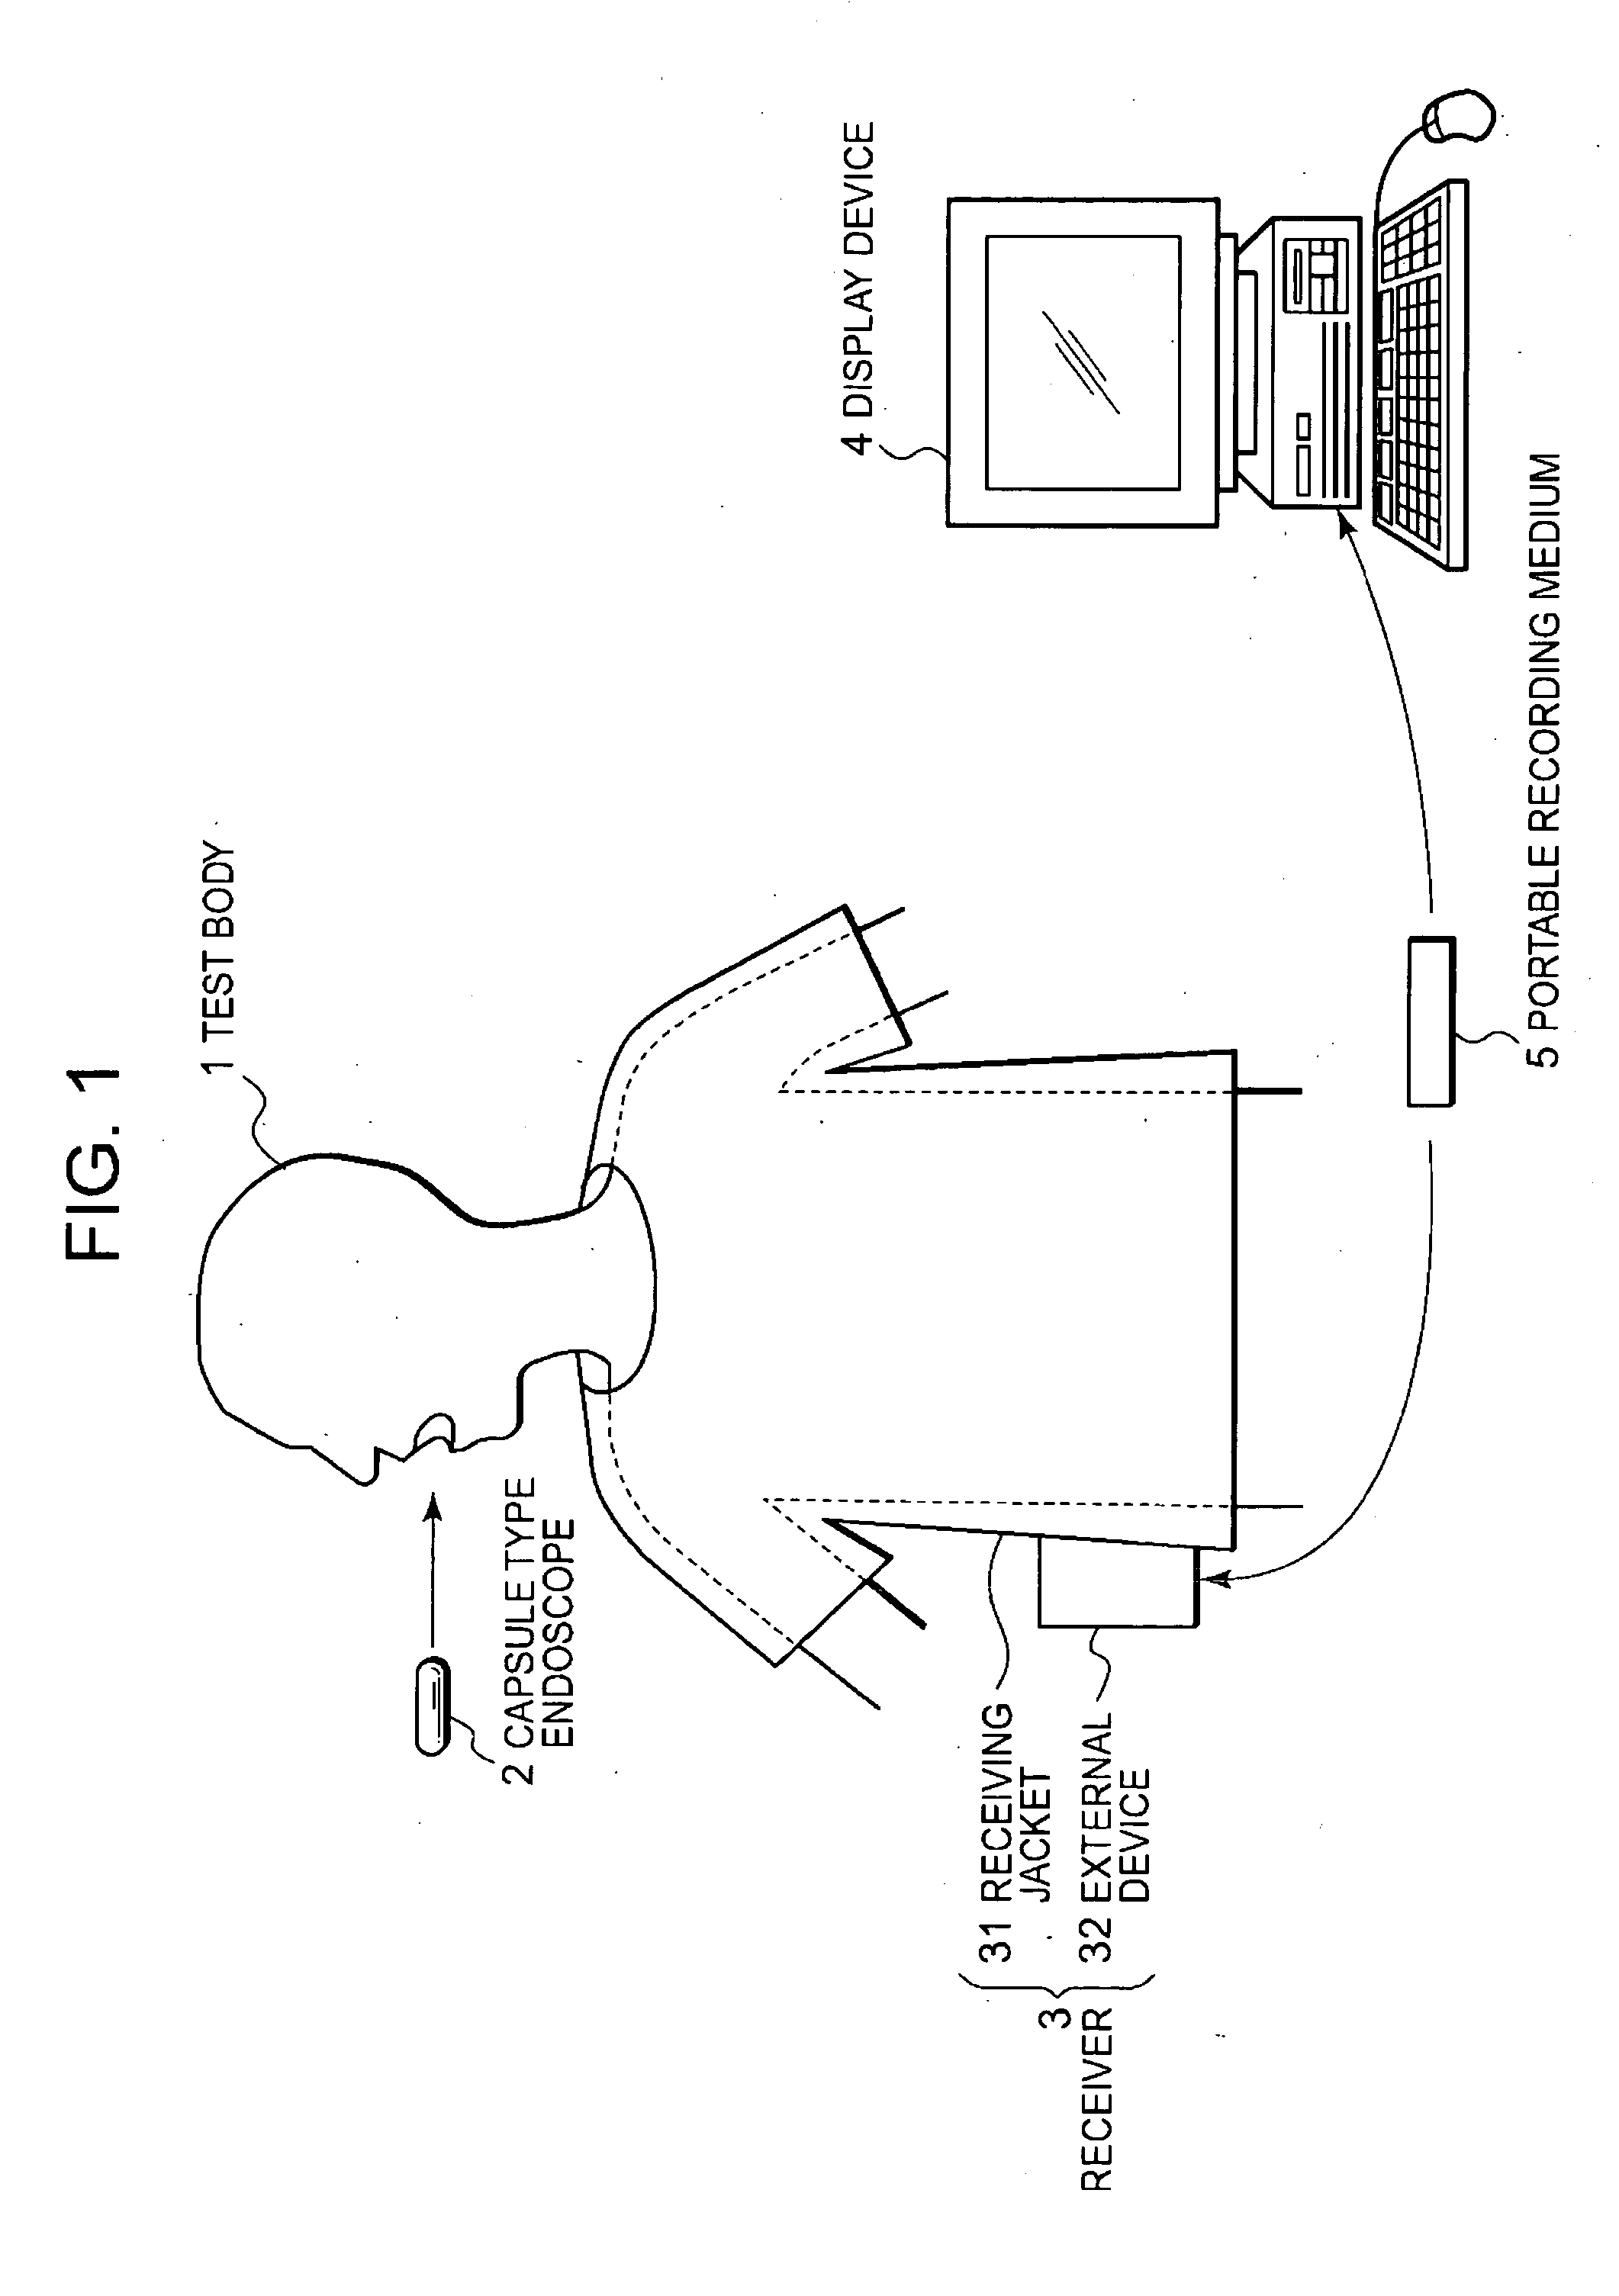 Intrabody introduced device